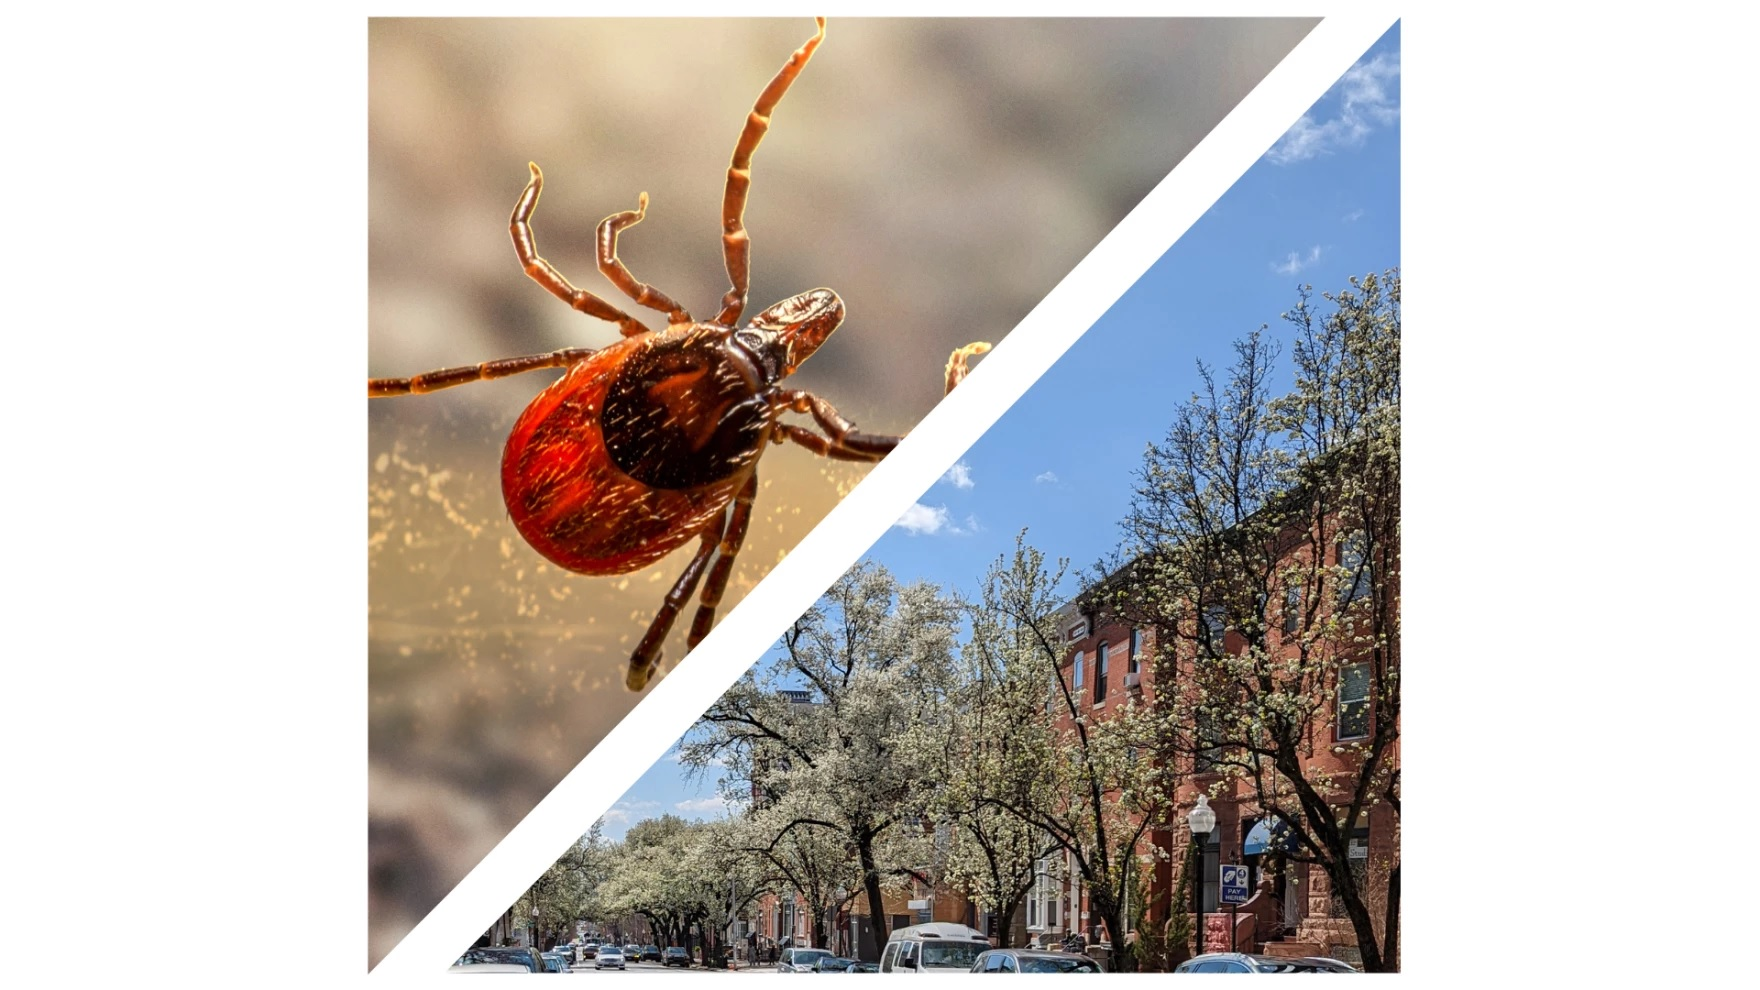 What can you do to avoid ticks and prevent Lyme Disease? Plus, preserving Baltimore's pockets of open space.